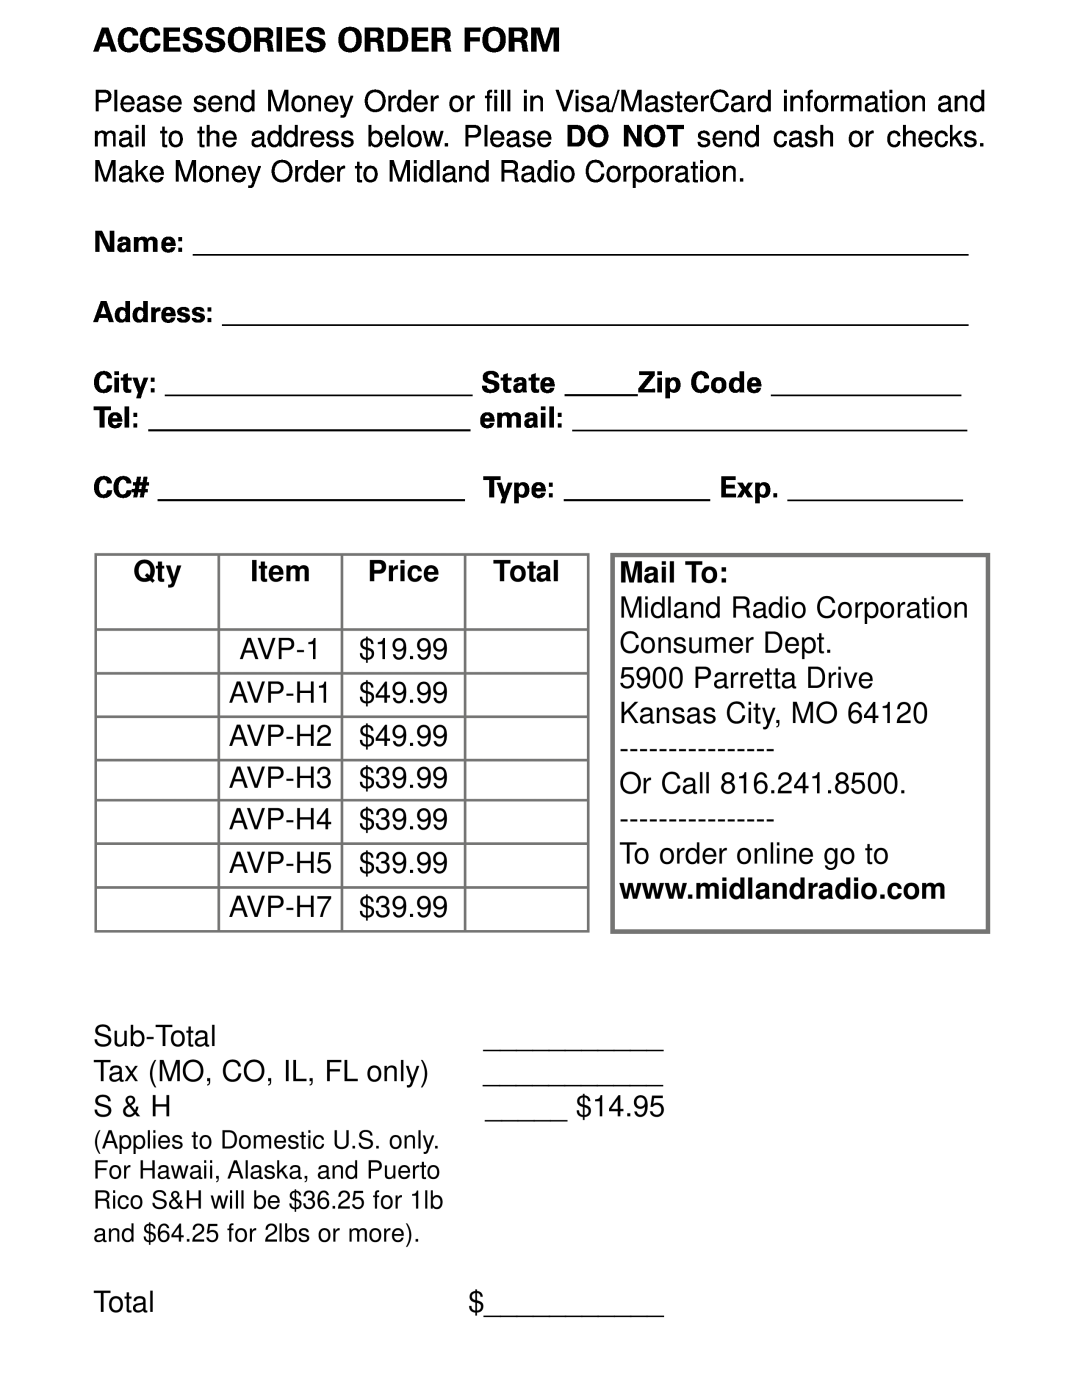 Midland Radio LXT112 Series Accessories Order Form, Name Address City State Zip Code Tel email, Price, Total, Mail To 